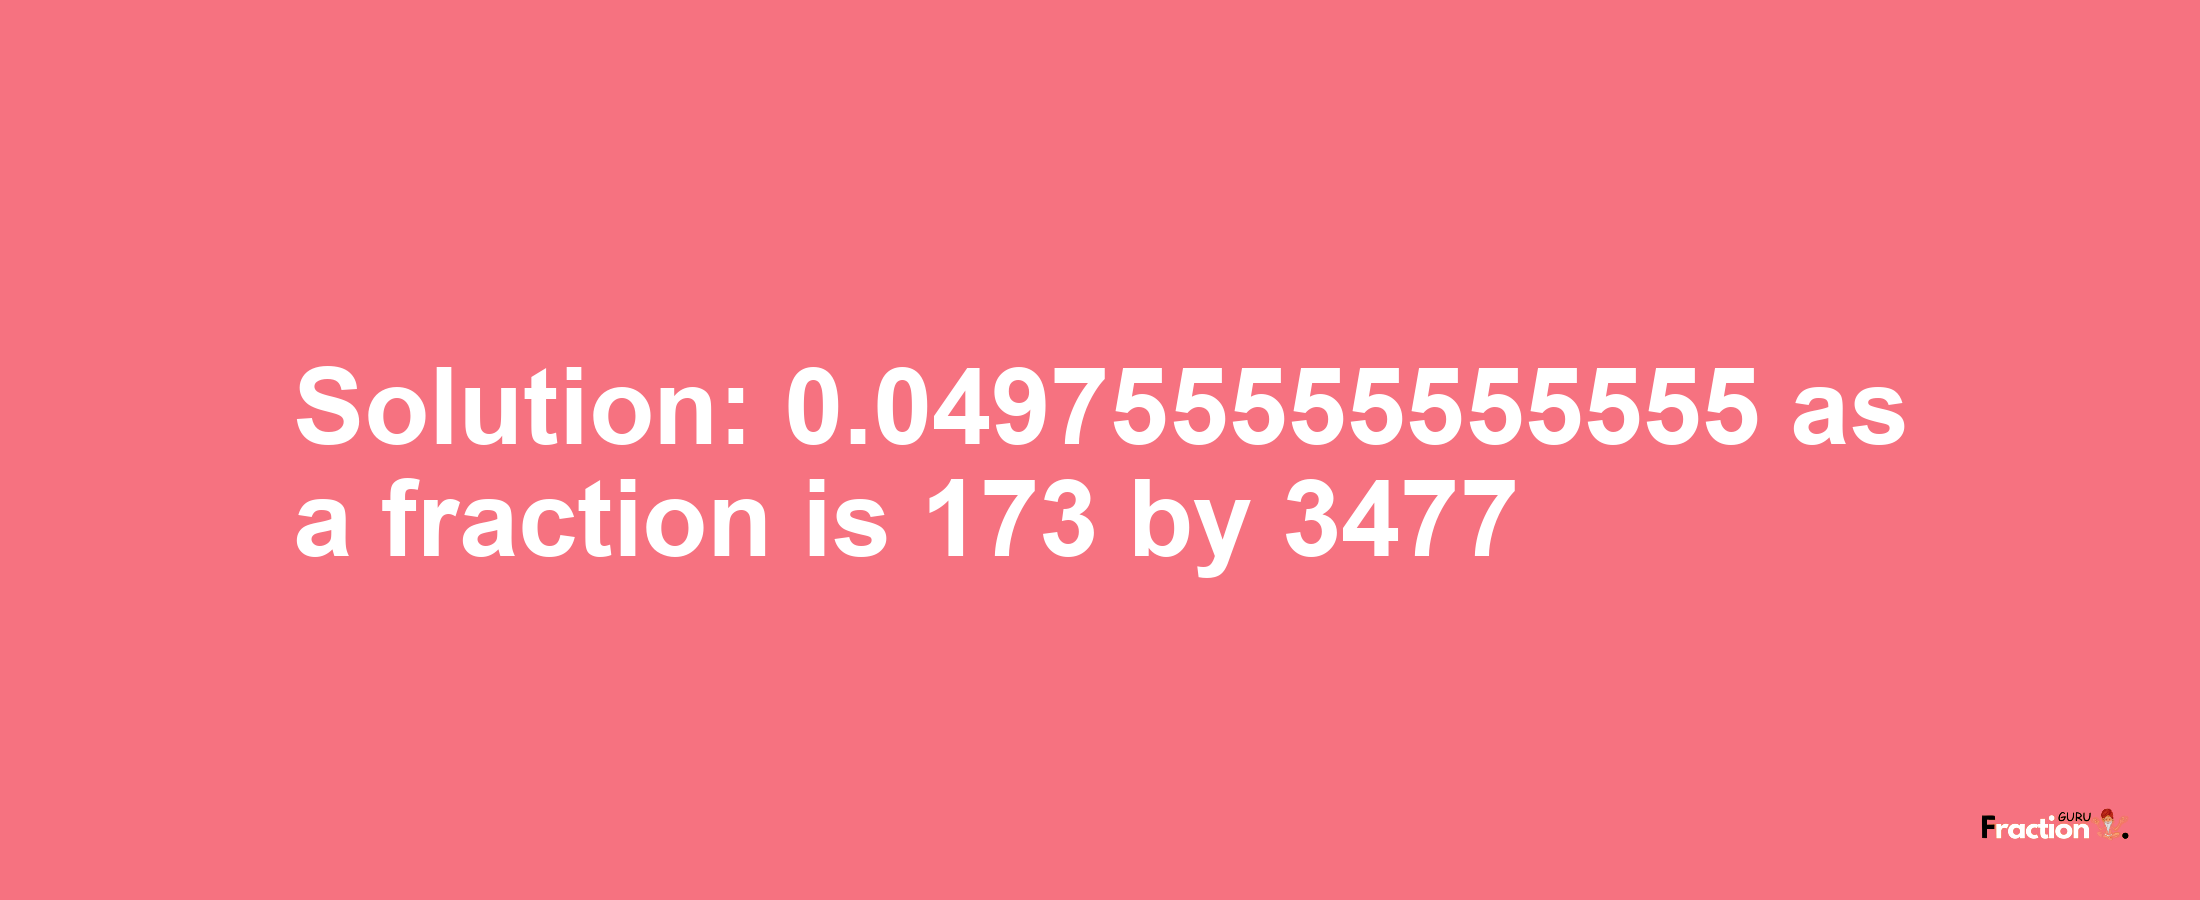 Solution:0.049755555555555 as a fraction is 173/3477